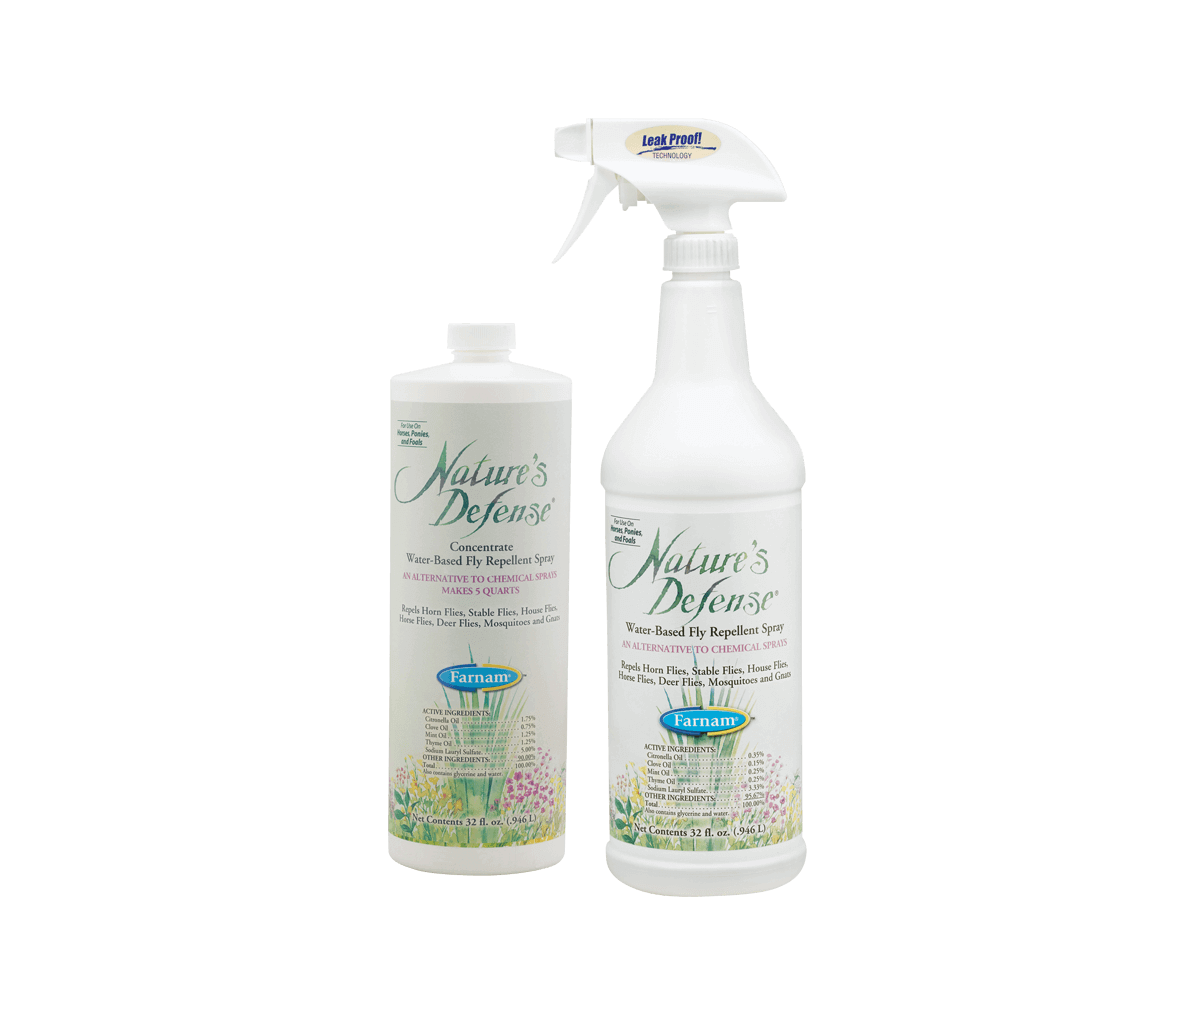 Nature's Defense Water-Based Fly Repellent Spray